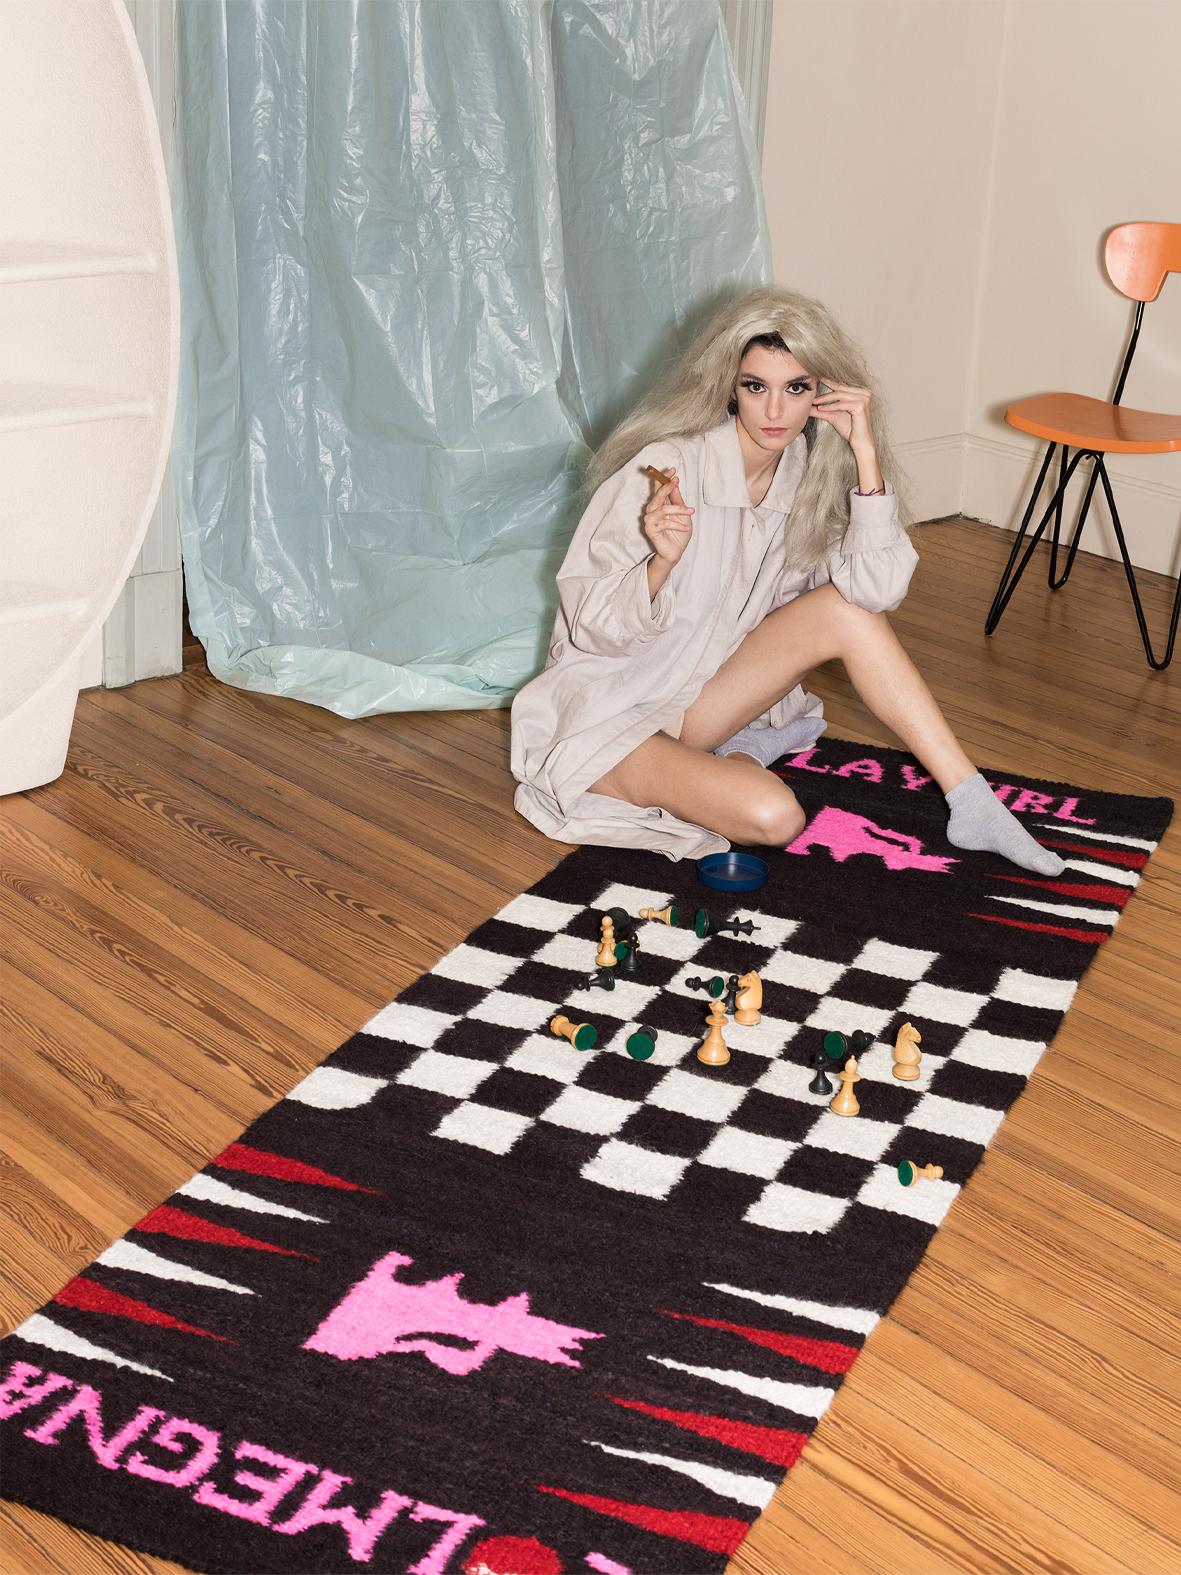 Adapted from the original design by Victoria Colmegna, Lady Colmegna Chess Rug, 2020.

Limited edition of 15 handmade and unique rugs.

LALANA RUGS is an applied arts initiative born from the desire to combine proposals by contemporary artists with